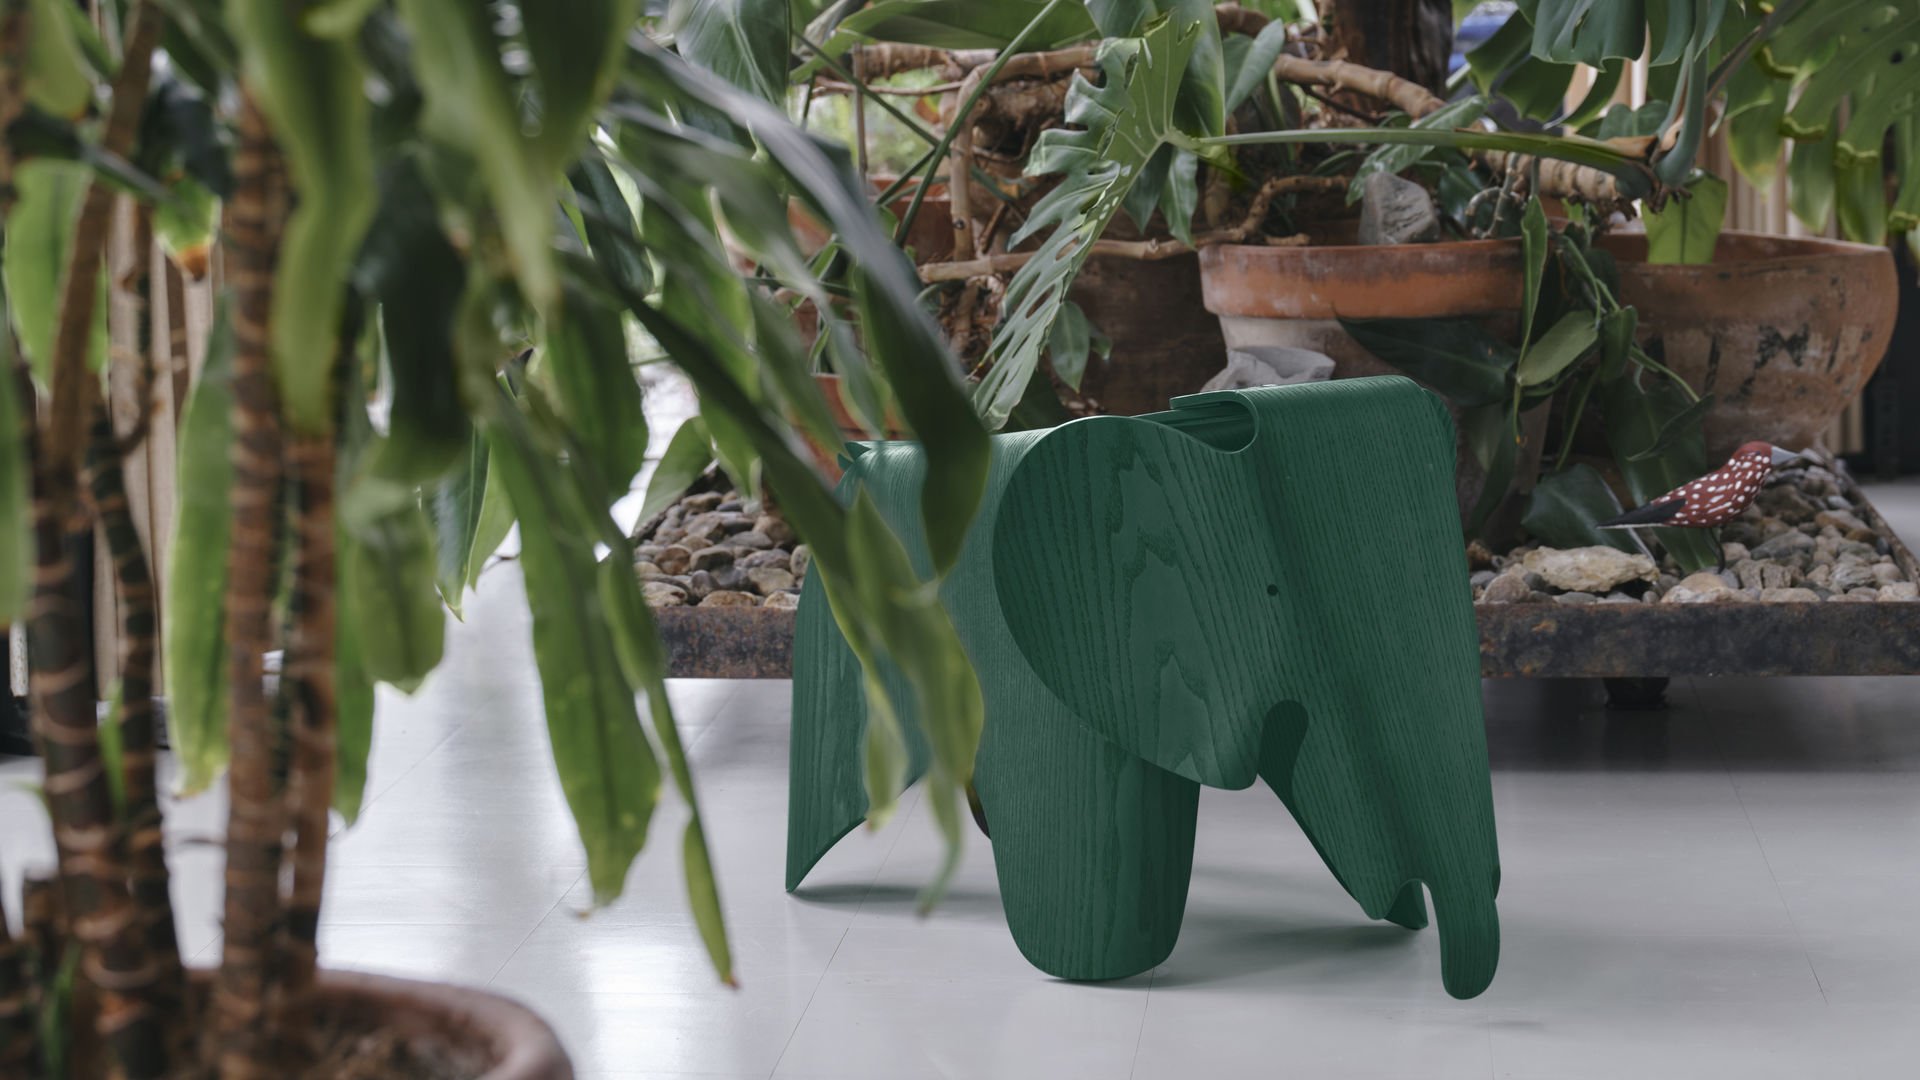 vitra Eames elephant olifant hout limited edition loncin Hasselt leuven zoutleeuw design  meubels